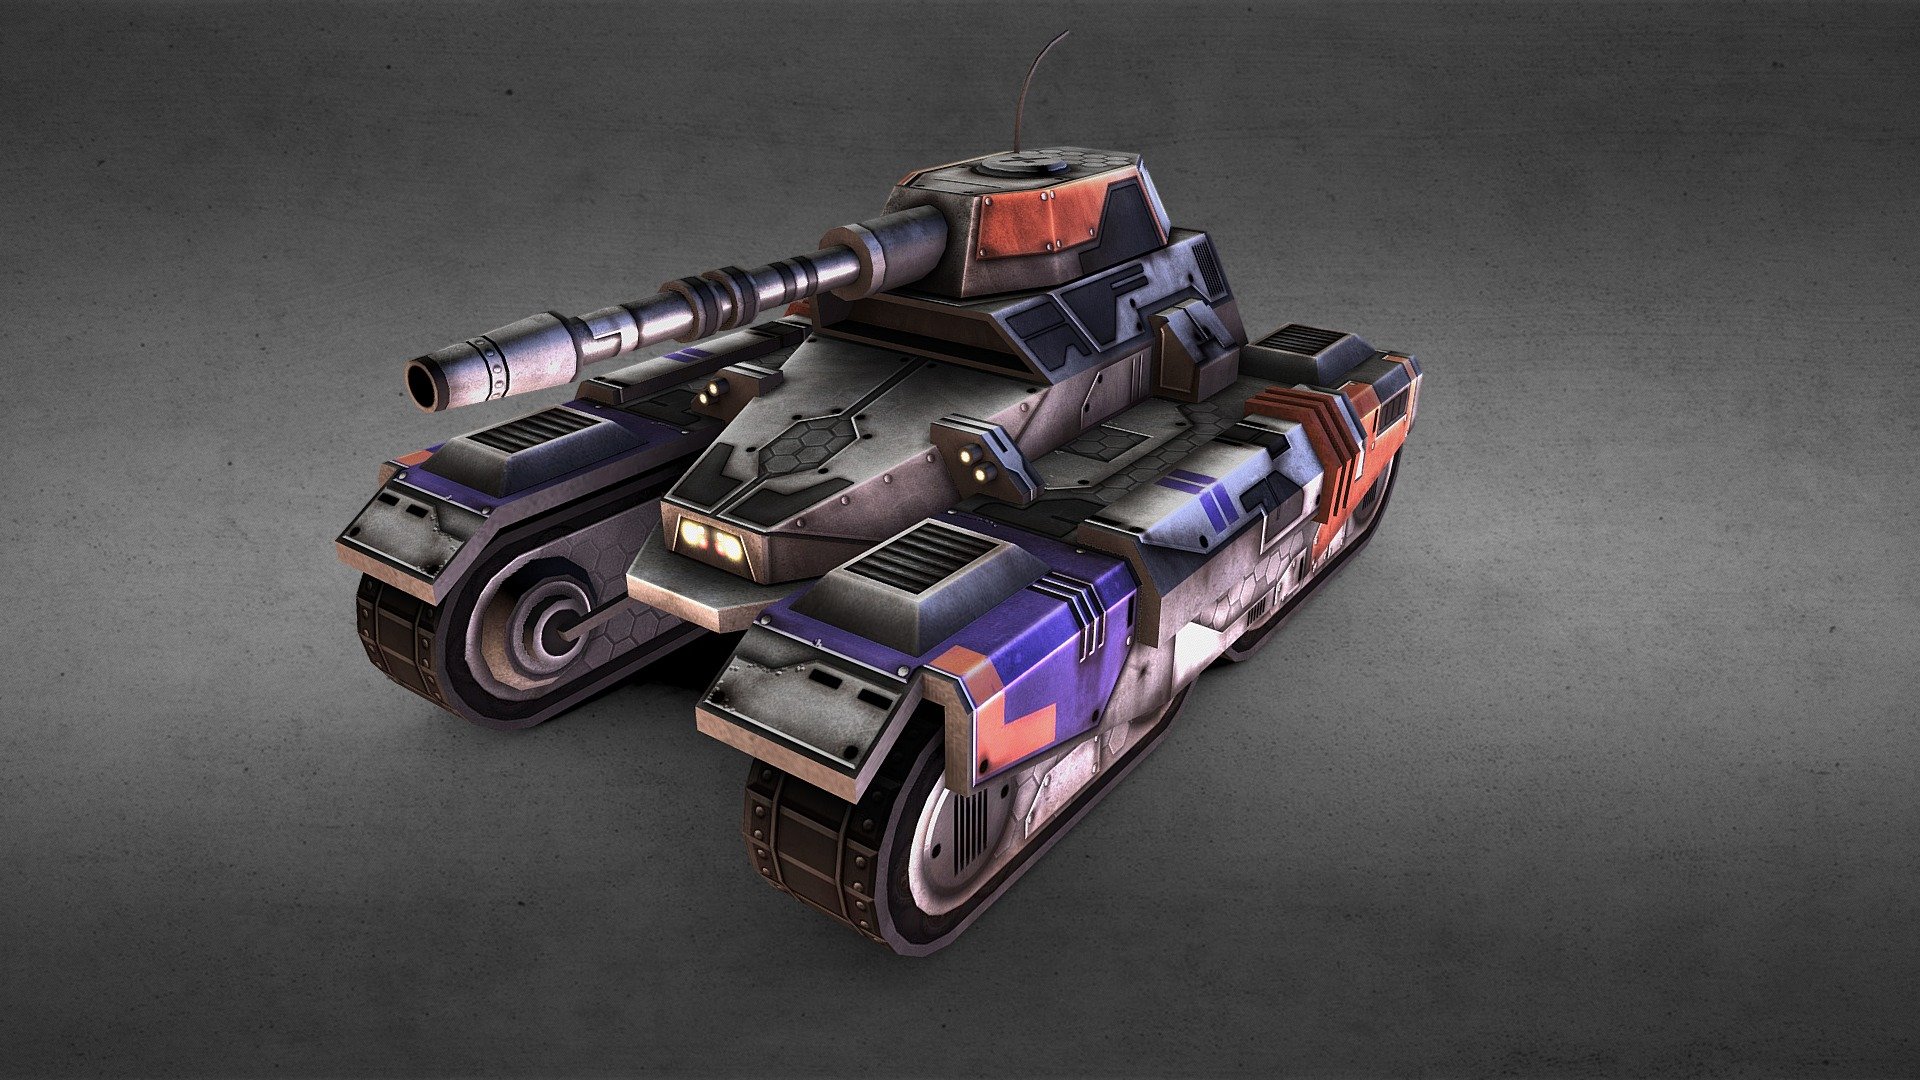 Stylized low poly model of a sci-fi tank. The main gun is separate from the tank body so it can be rotated. The model uses a 2048 x 2048 diffuse and glow map.

Tank treads are NOT animated
Treads are portrayed via texture- if you wish to animated them it must be with an animated texture or new geometry.

FORMATS- FBX and OBJ - Future Tank - Buy Royalty Free 3D model by JonLundy3D 3d model